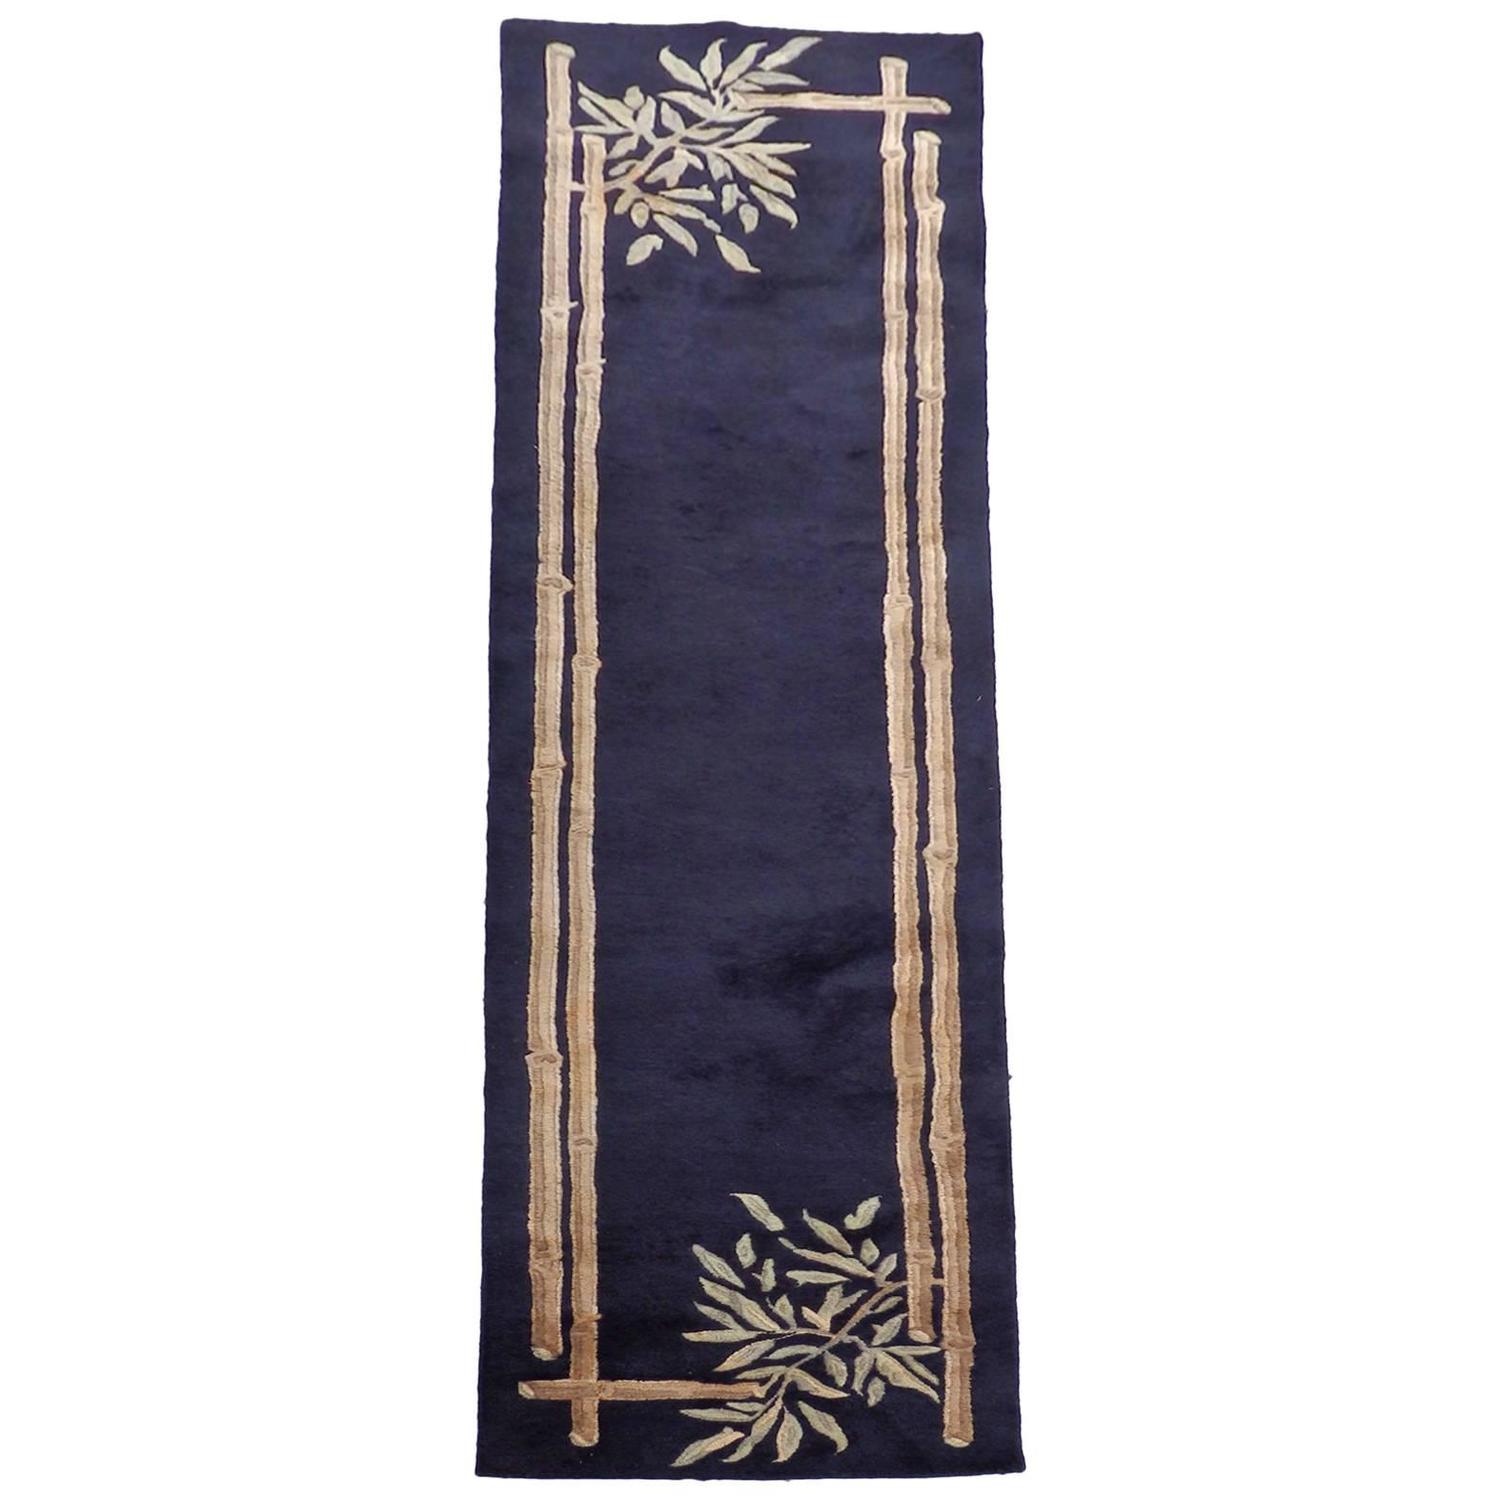 Large Art Deco Themed Wool Runner Rug For Sale at 1stdibs